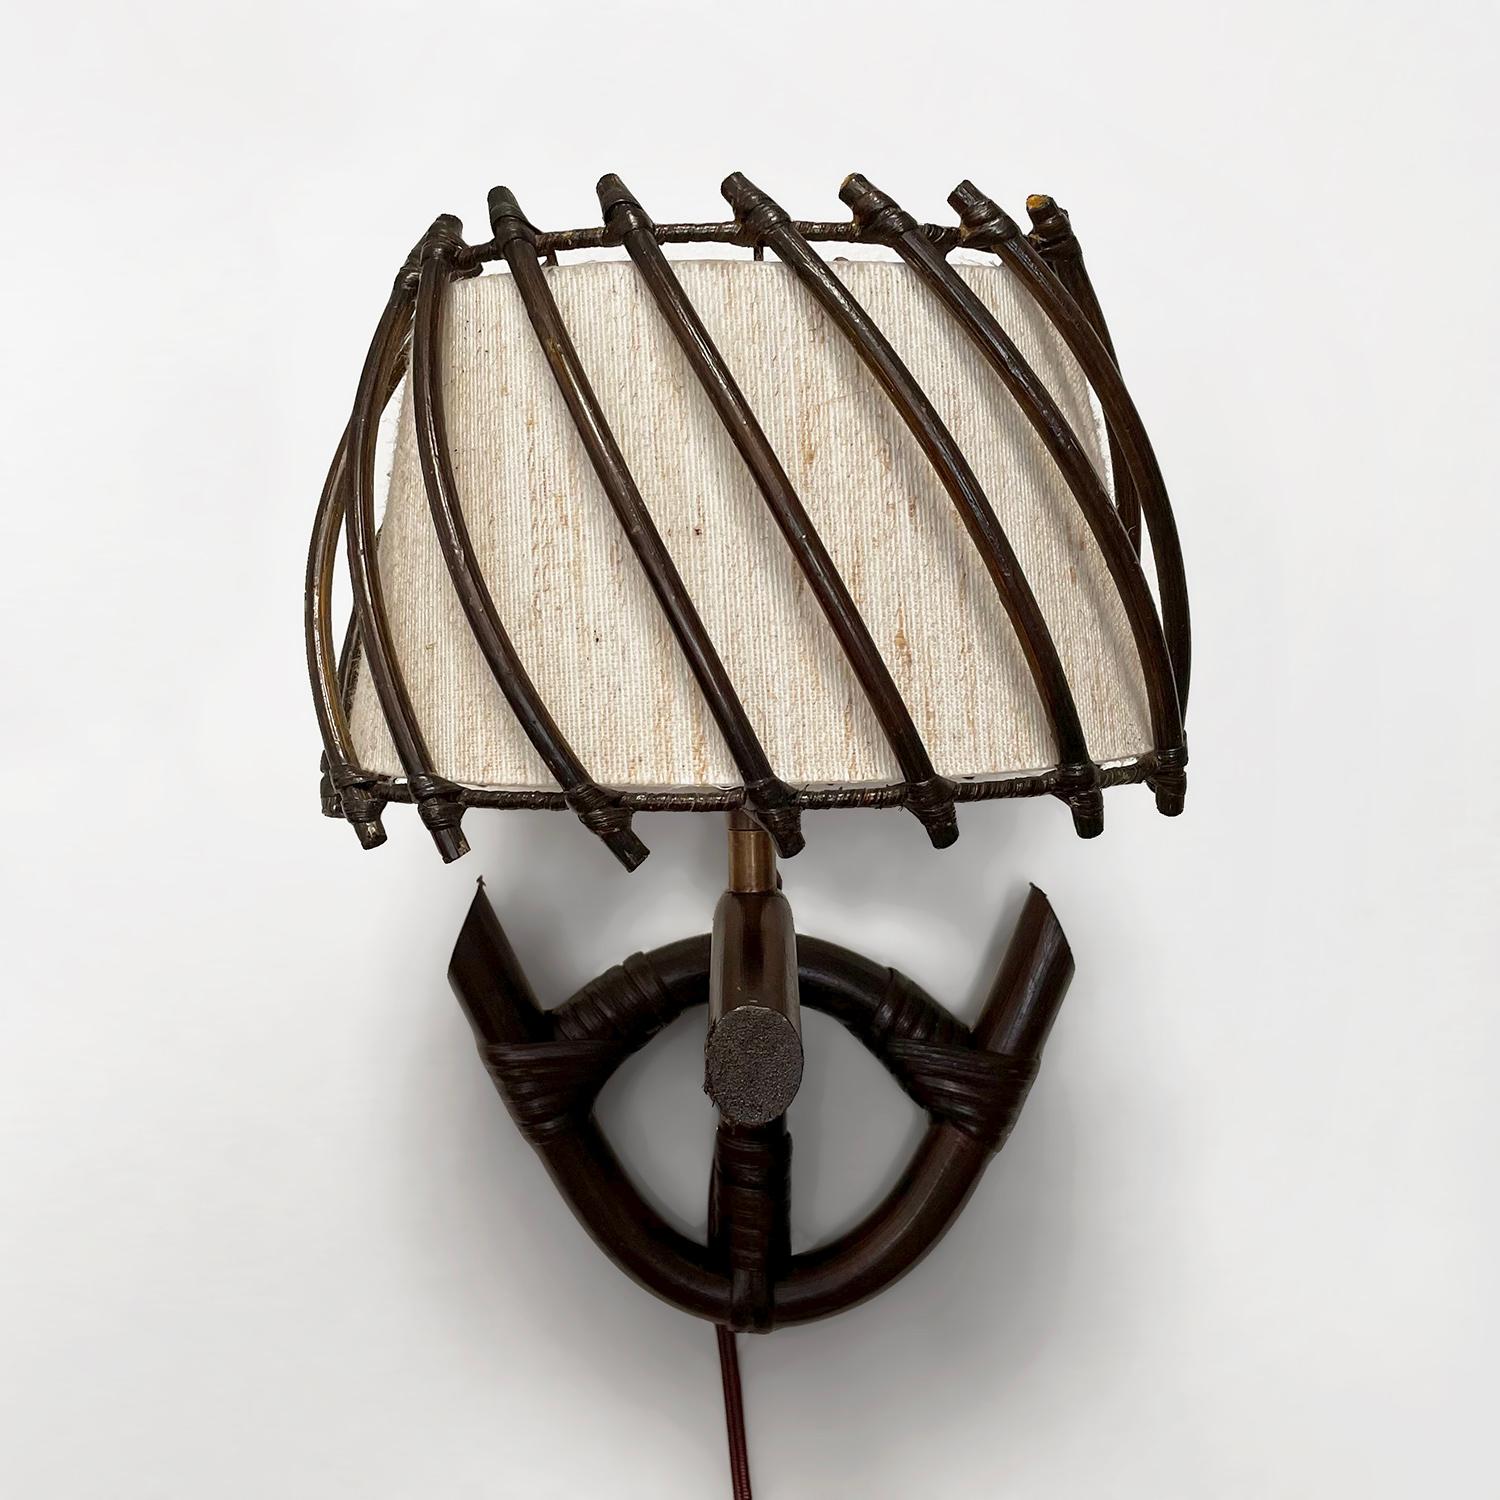 French rattan and bamboo sconces in the style of Louis Sognot
France, circa 1960’s 
Hand sculpted rattan and bamboo create these handsome sconces
Original natural fiber shades
Patina from age and use 
Newly rewired.